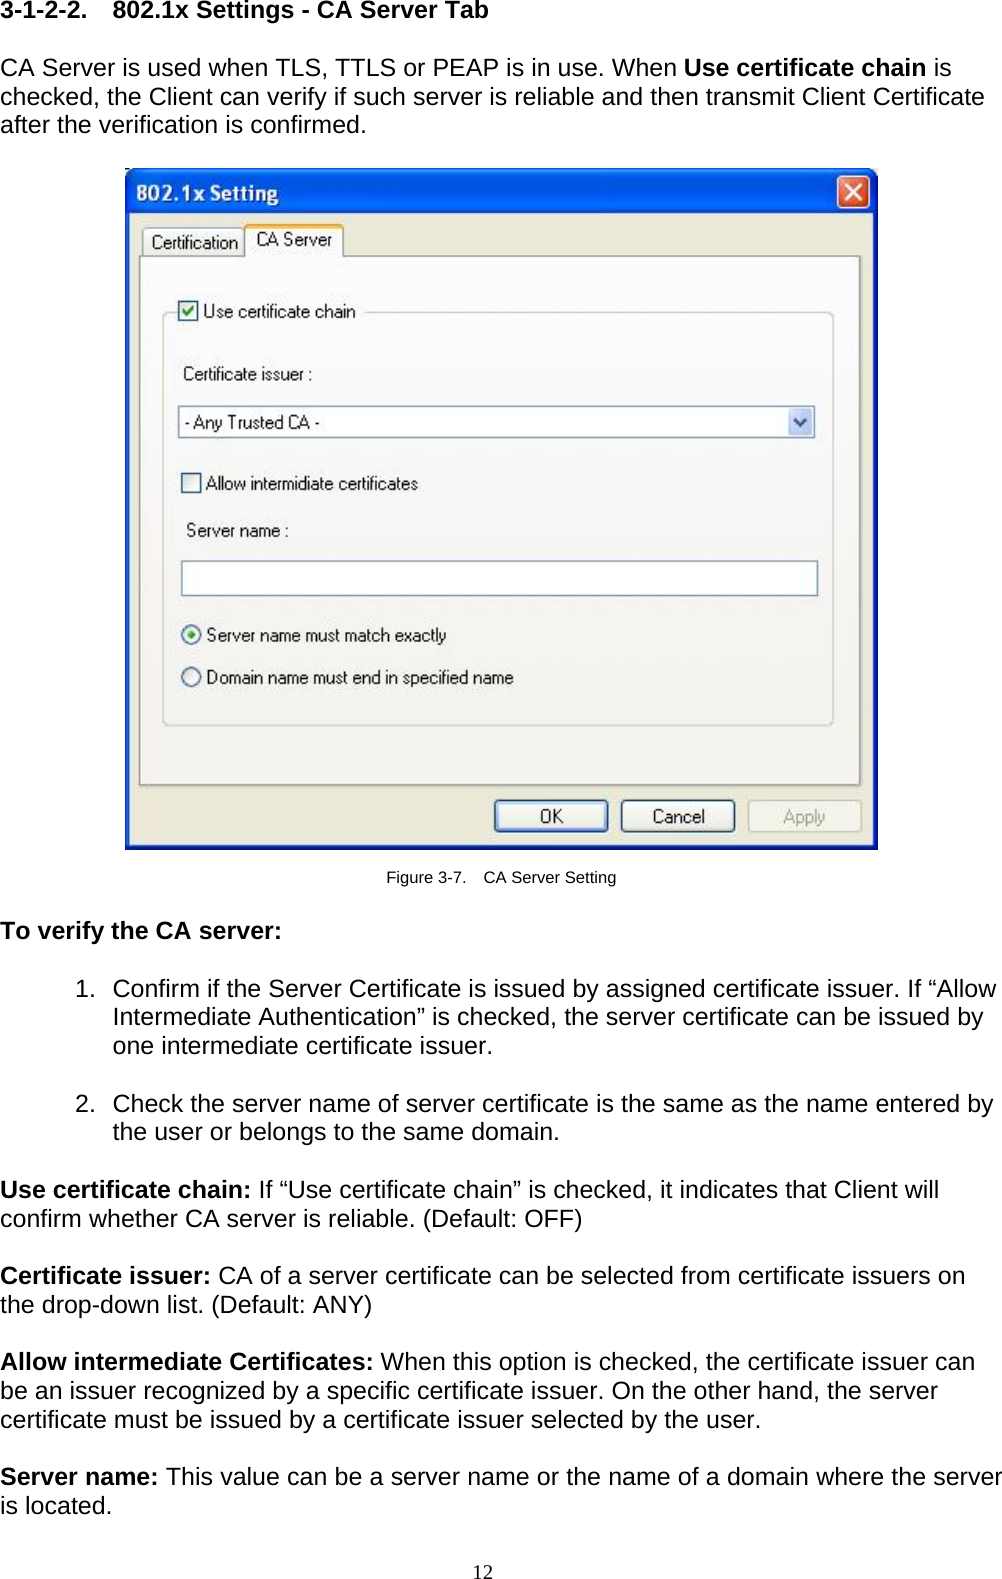 3-1-2-2. 802.1x Settings - CA Server Tab  CA Server is used when TLS, TTLS or PEAP is in use. When Use certificate chain is checked, the Client can verify if such server is reliable and then transmit Client Certificate after the verification is confirmed.      Figure 3-7.    CA Server Setting  To verify the CA server:  1.  Confirm if the Server Certificate is issued by assigned certificate issuer. If “Allow Intermediate Authentication” is checked, the server certificate can be issued by one intermediate certificate issuer.  2.  Check the server name of server certificate is the same as the name entered by the user or belongs to the same domain.  Use certificate chain: If “Use certificate chain” is checked, it indicates that Client will confirm whether CA server is reliable. (Default: OFF)  Certificate issuer: CA of a server certificate can be selected from certificate issuers on the drop-down list. (Default: ANY)  Allow intermediate Certificates: When this option is checked, the certificate issuer can be an issuer recognized by a specific certificate issuer. On the other hand, the server certificate must be issued by a certificate issuer selected by the user.  Server name: This value can be a server name or the name of a domain where the server is located. 12   